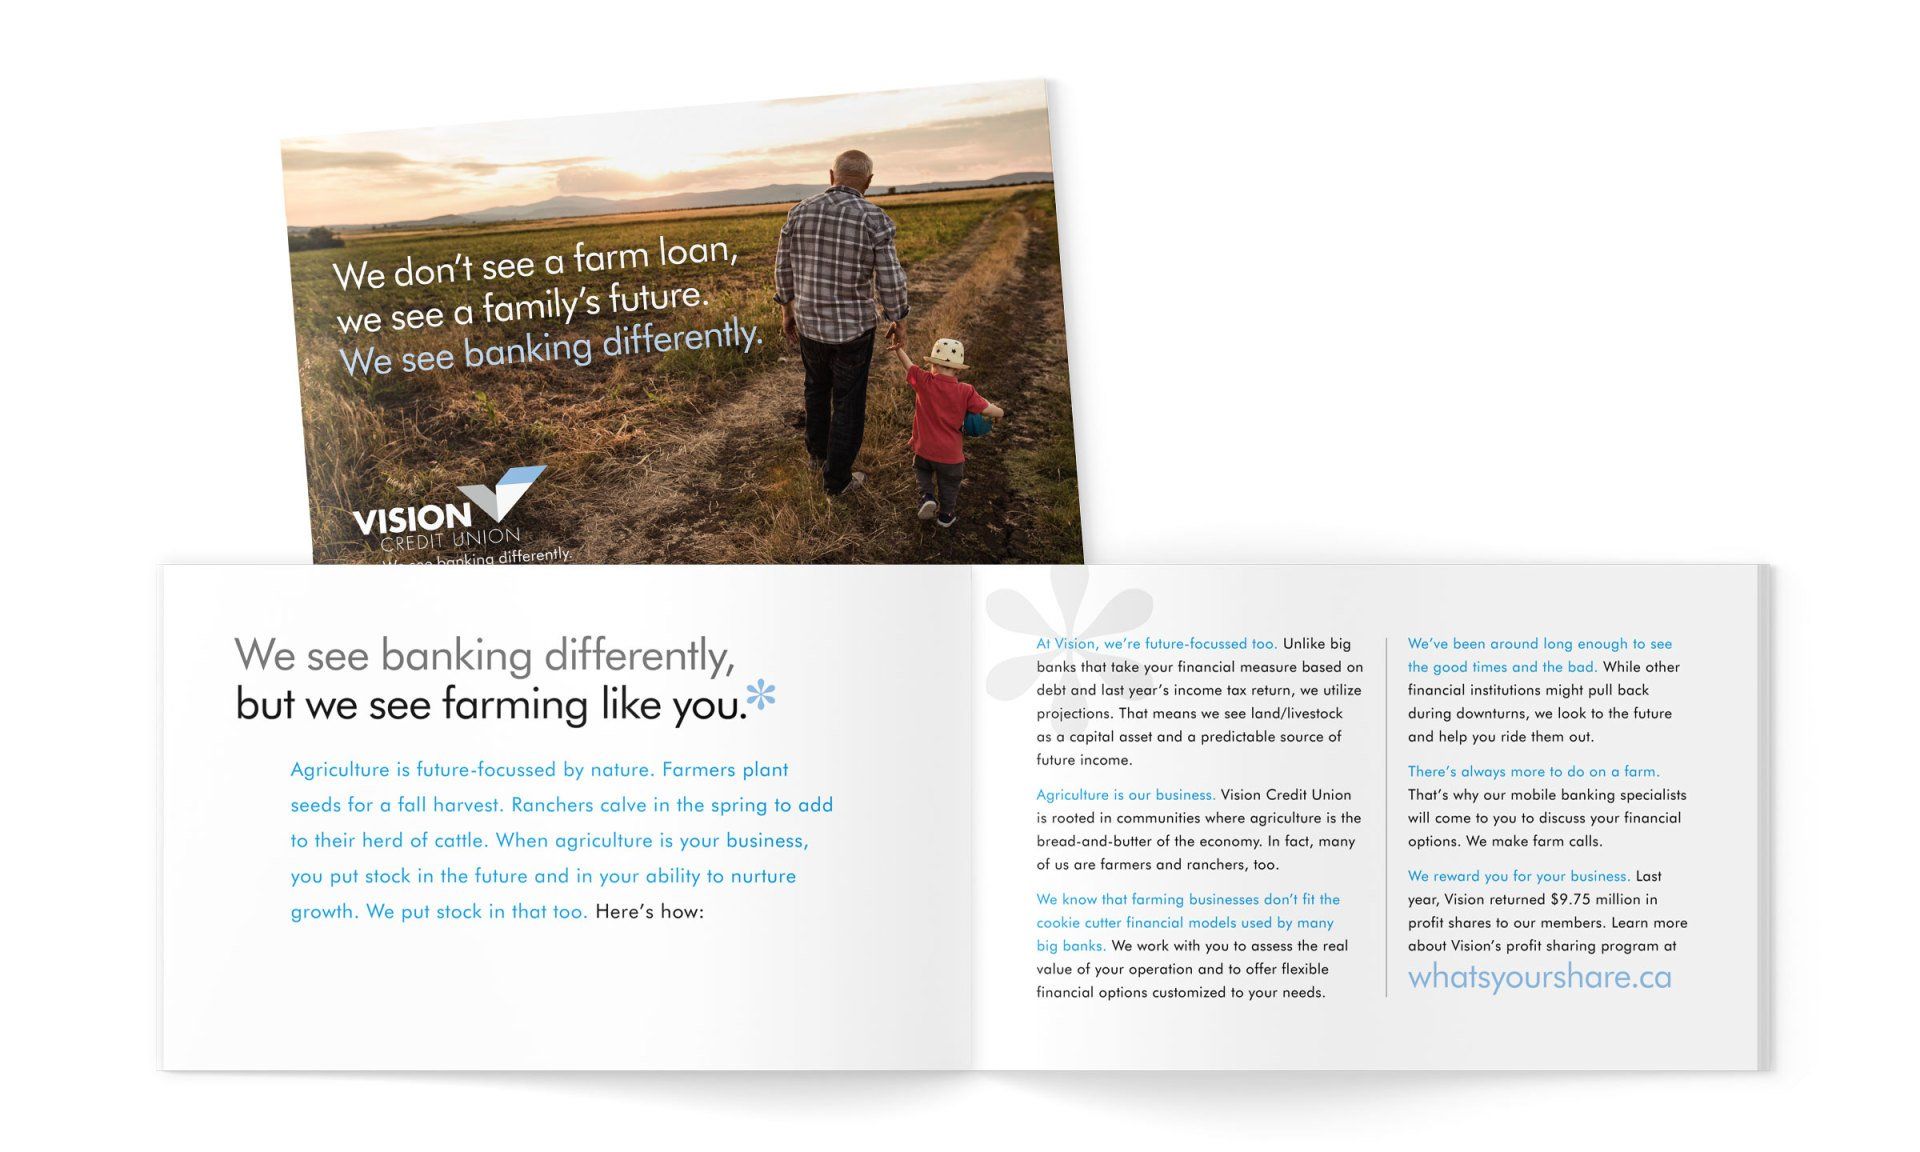 DIRECT MAIL PIECES AND CAMPAIGN PRODUCED BY IVY DESIGN INC FOR VISION CREDIT UNION